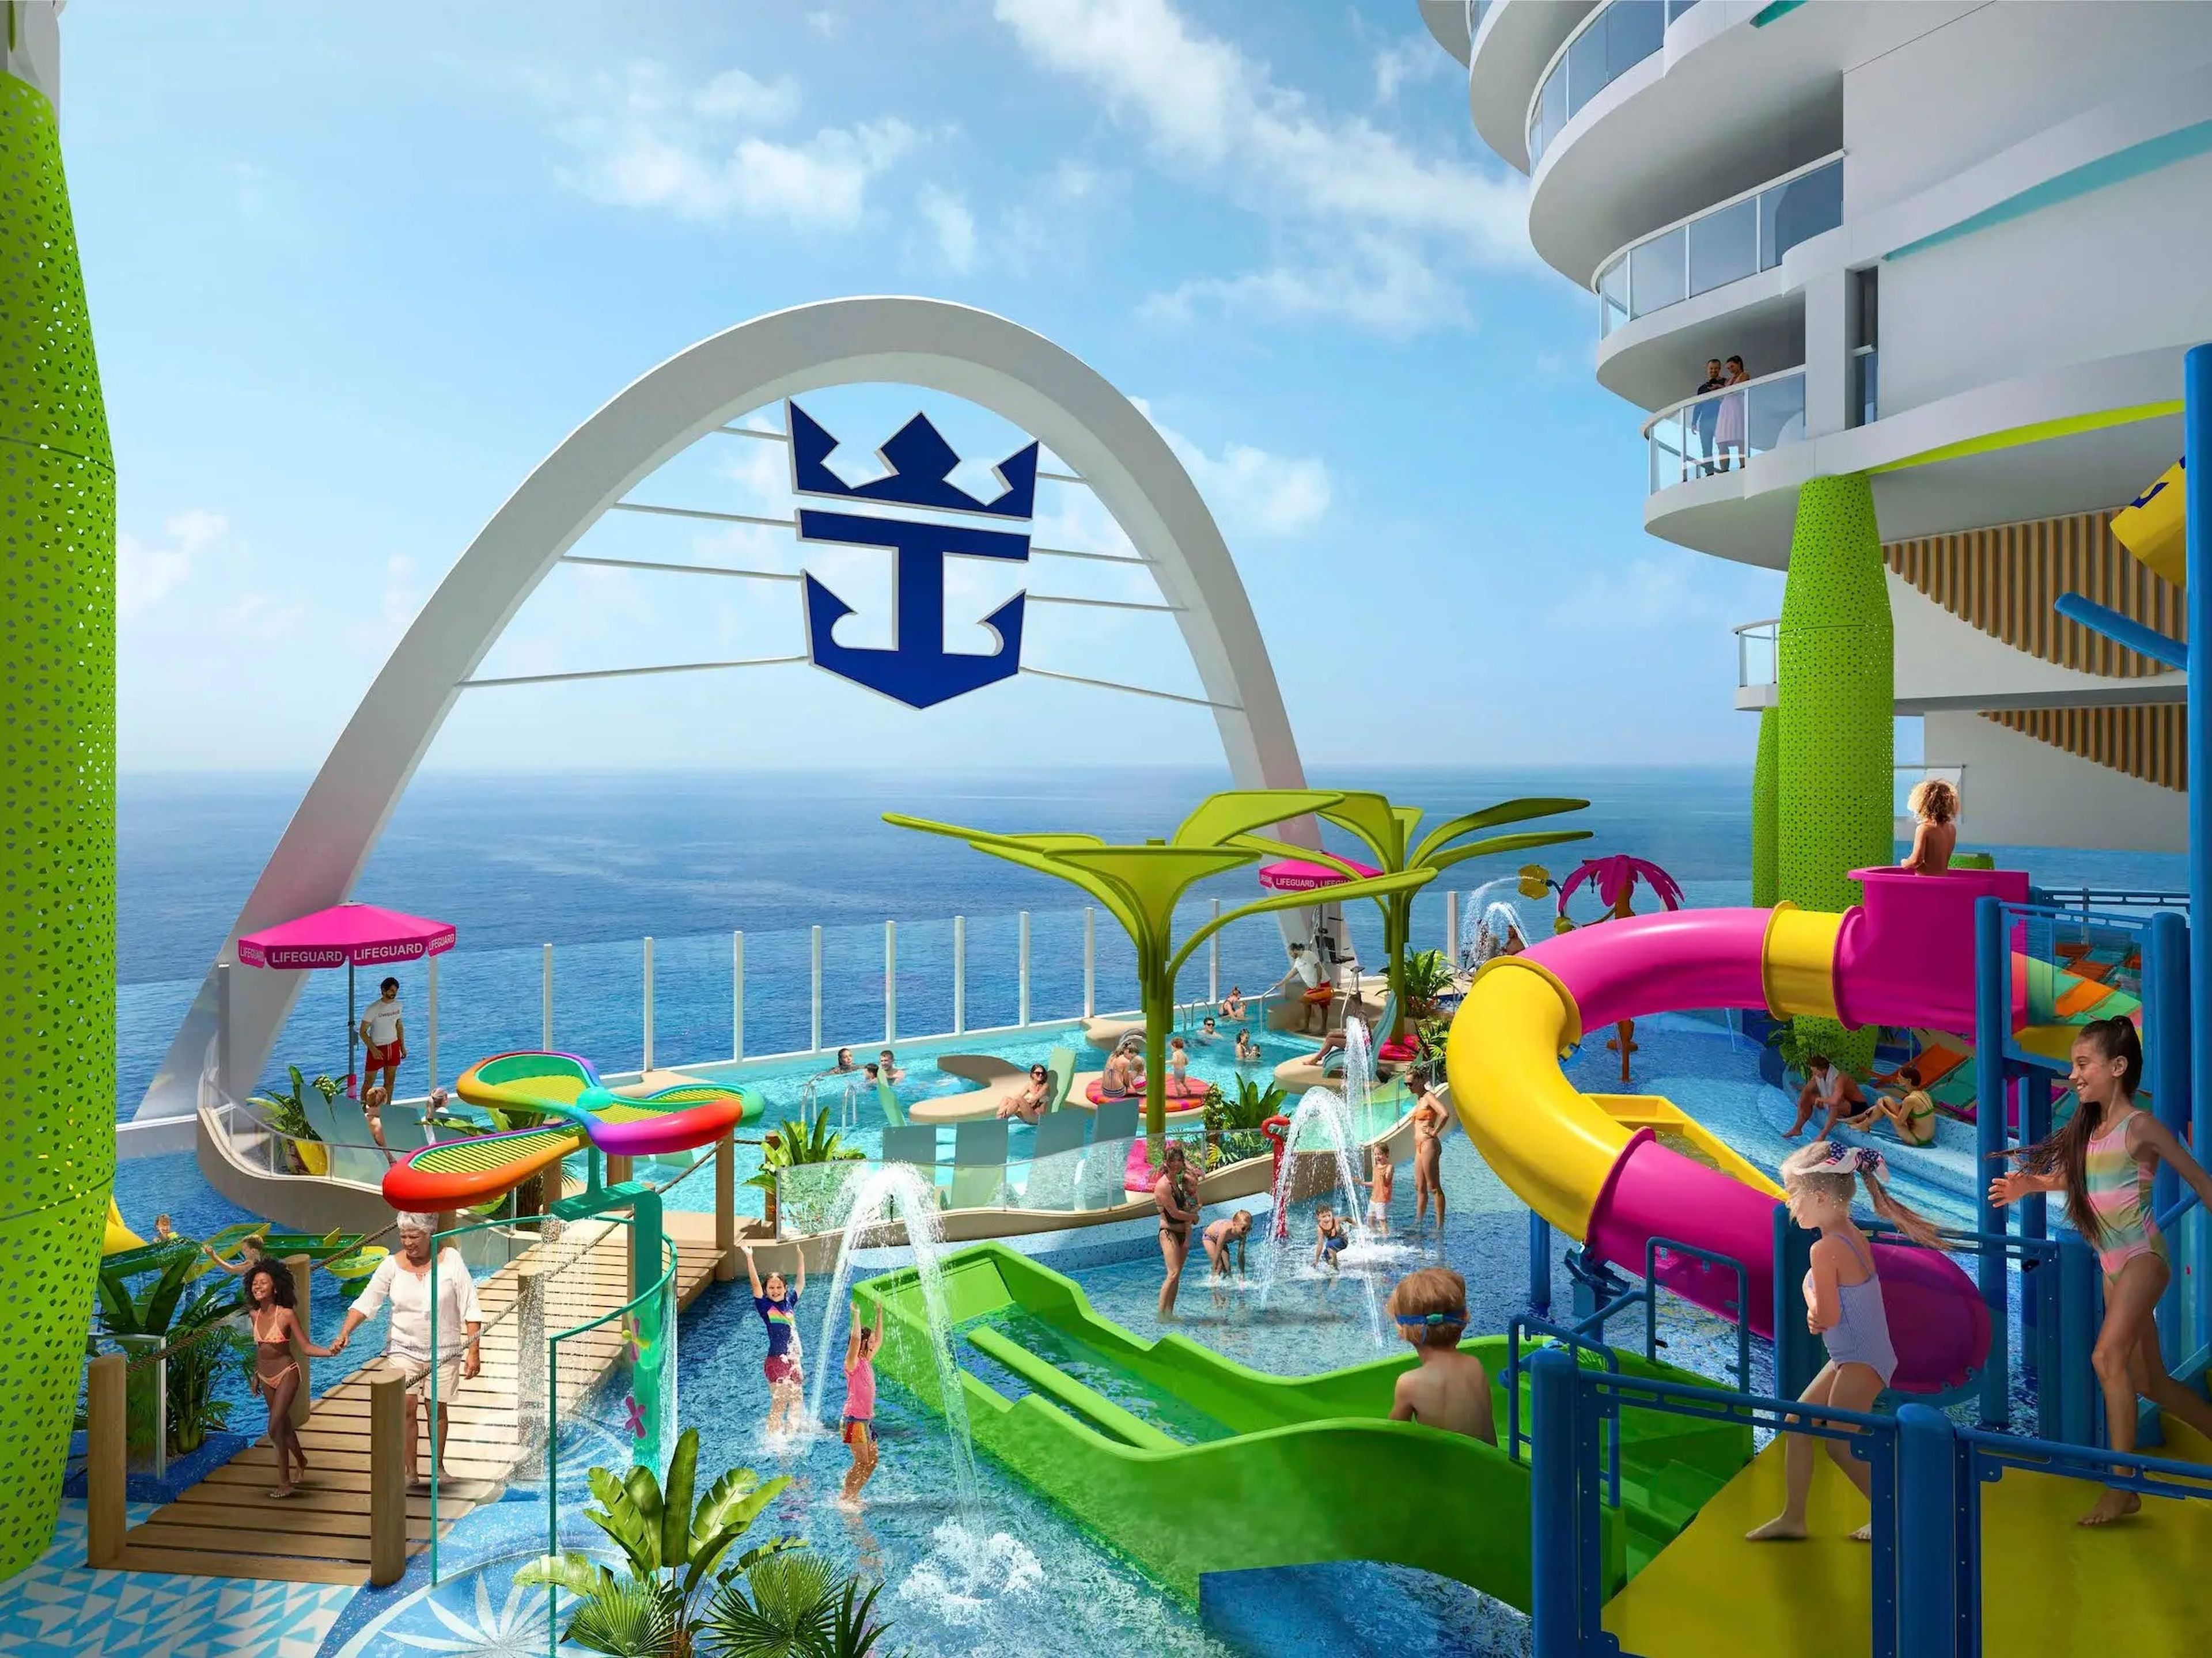 A rendering of Royal Caribbean International's Icon of the Seas cruise ship.